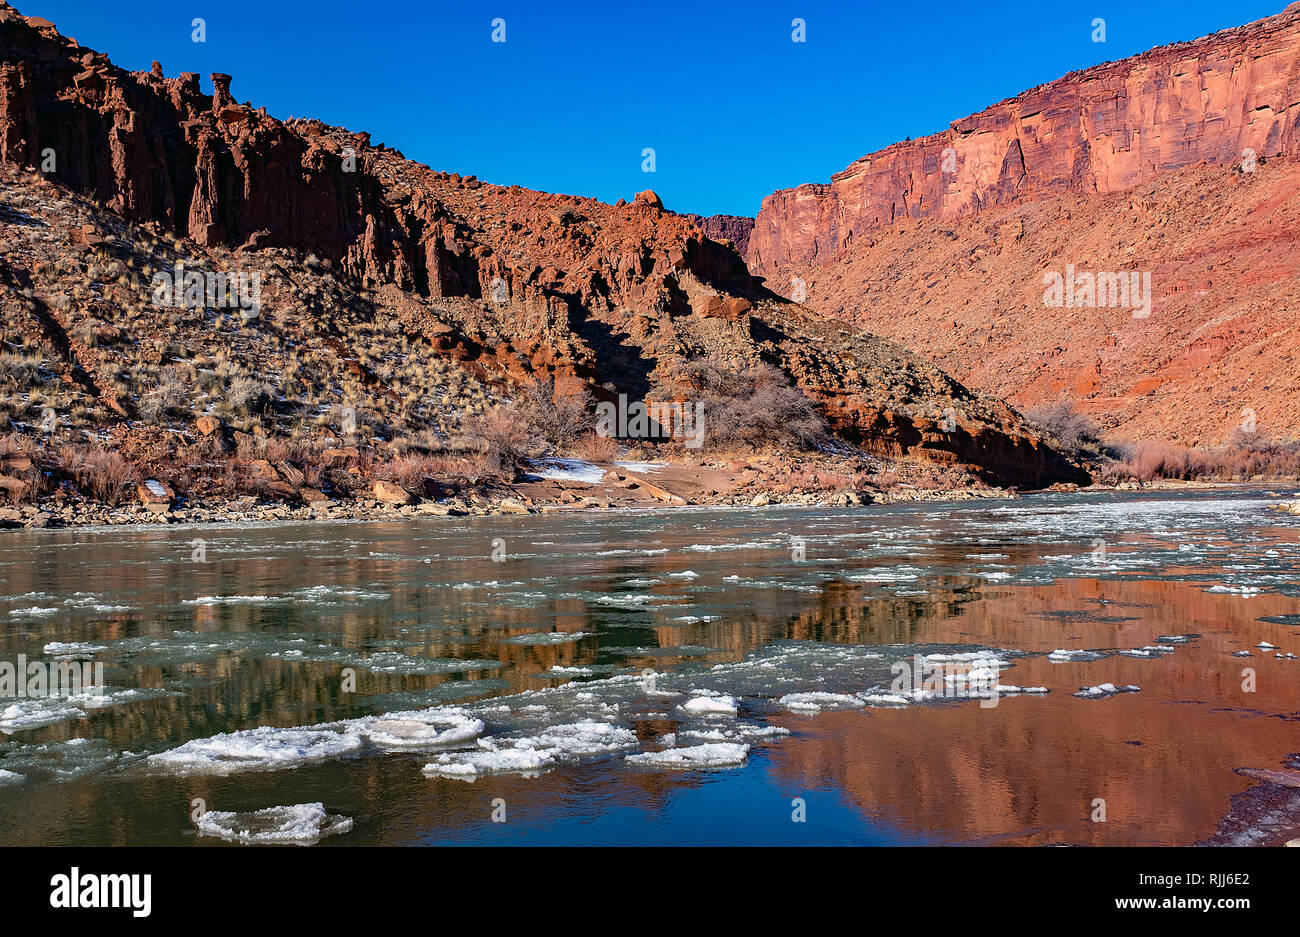 January 2019: The Colorado River winds its way along Utah Highway128 and provides a scenic drive into the red sandstone canyons near Moab, Utah. Stock Photo